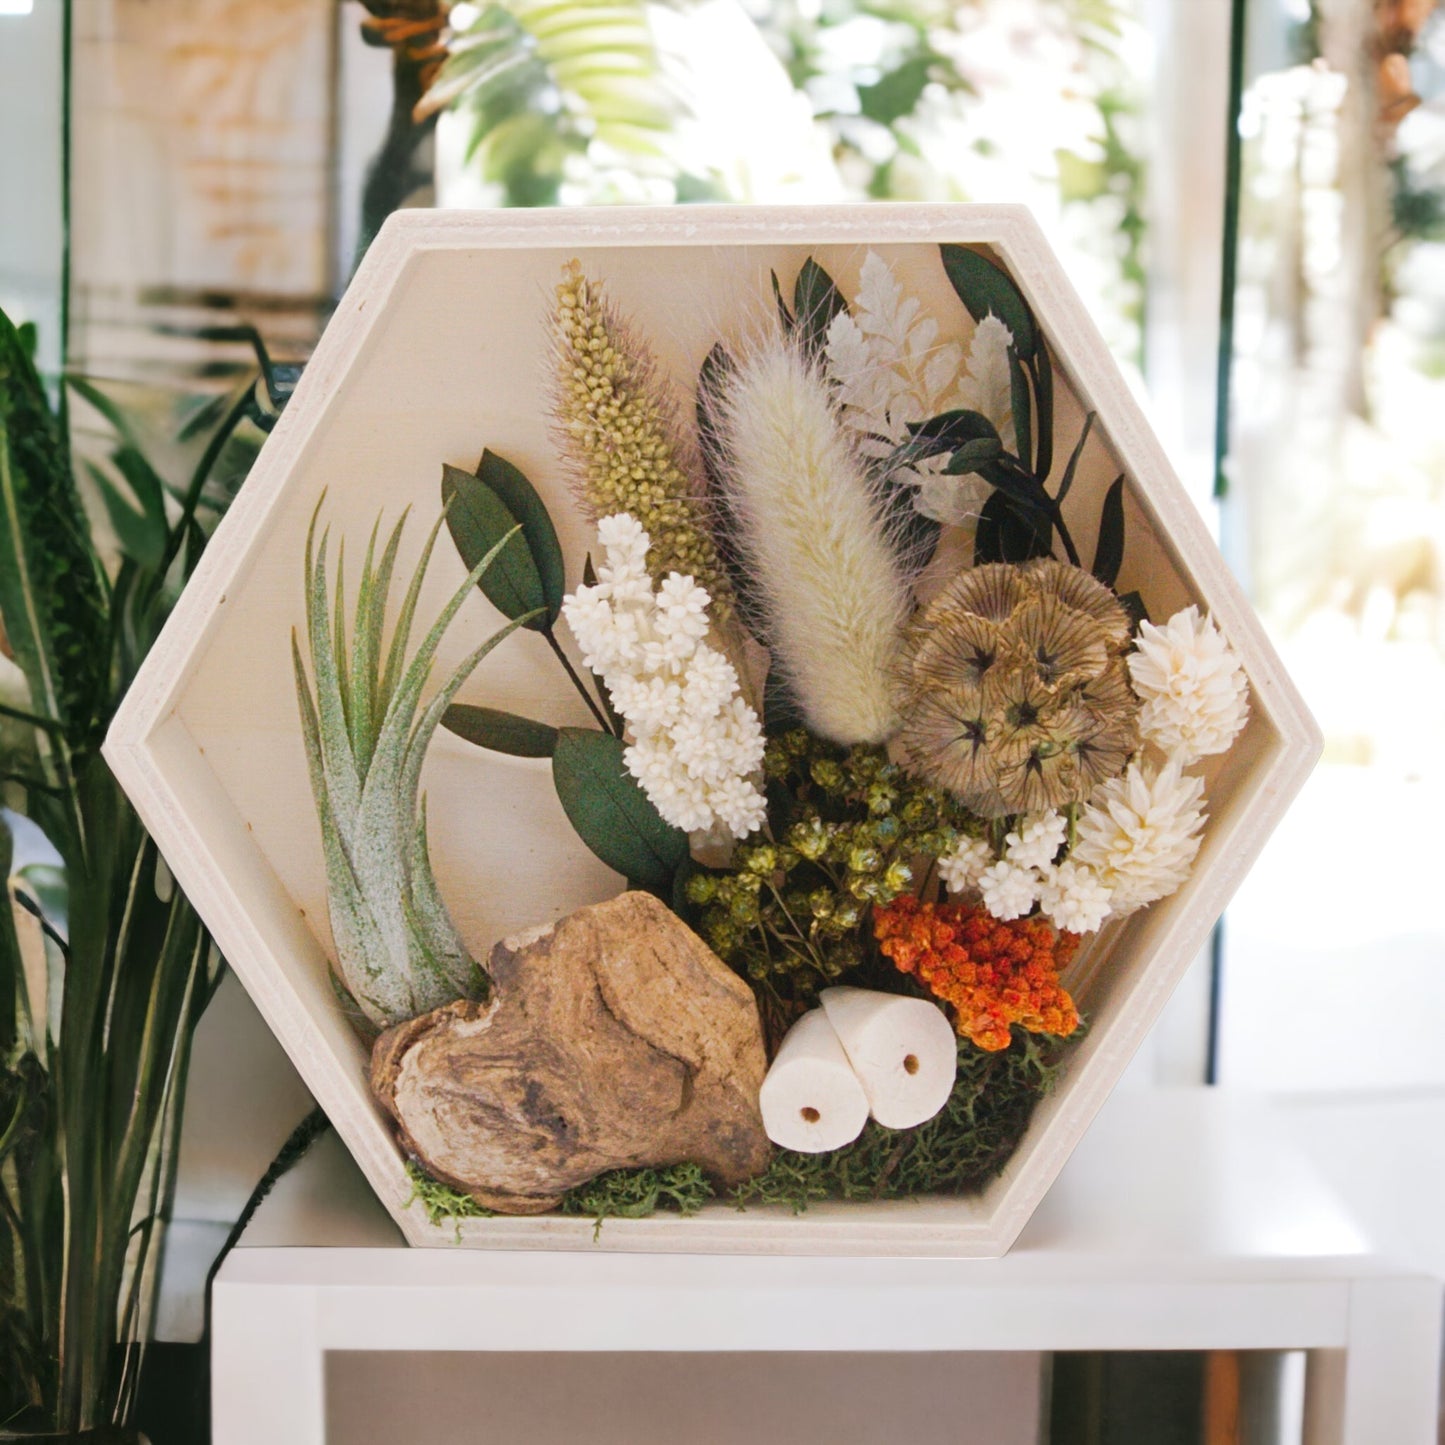 Wooden hexagon box frame filled with dried flowers, wood, moss and an airplant